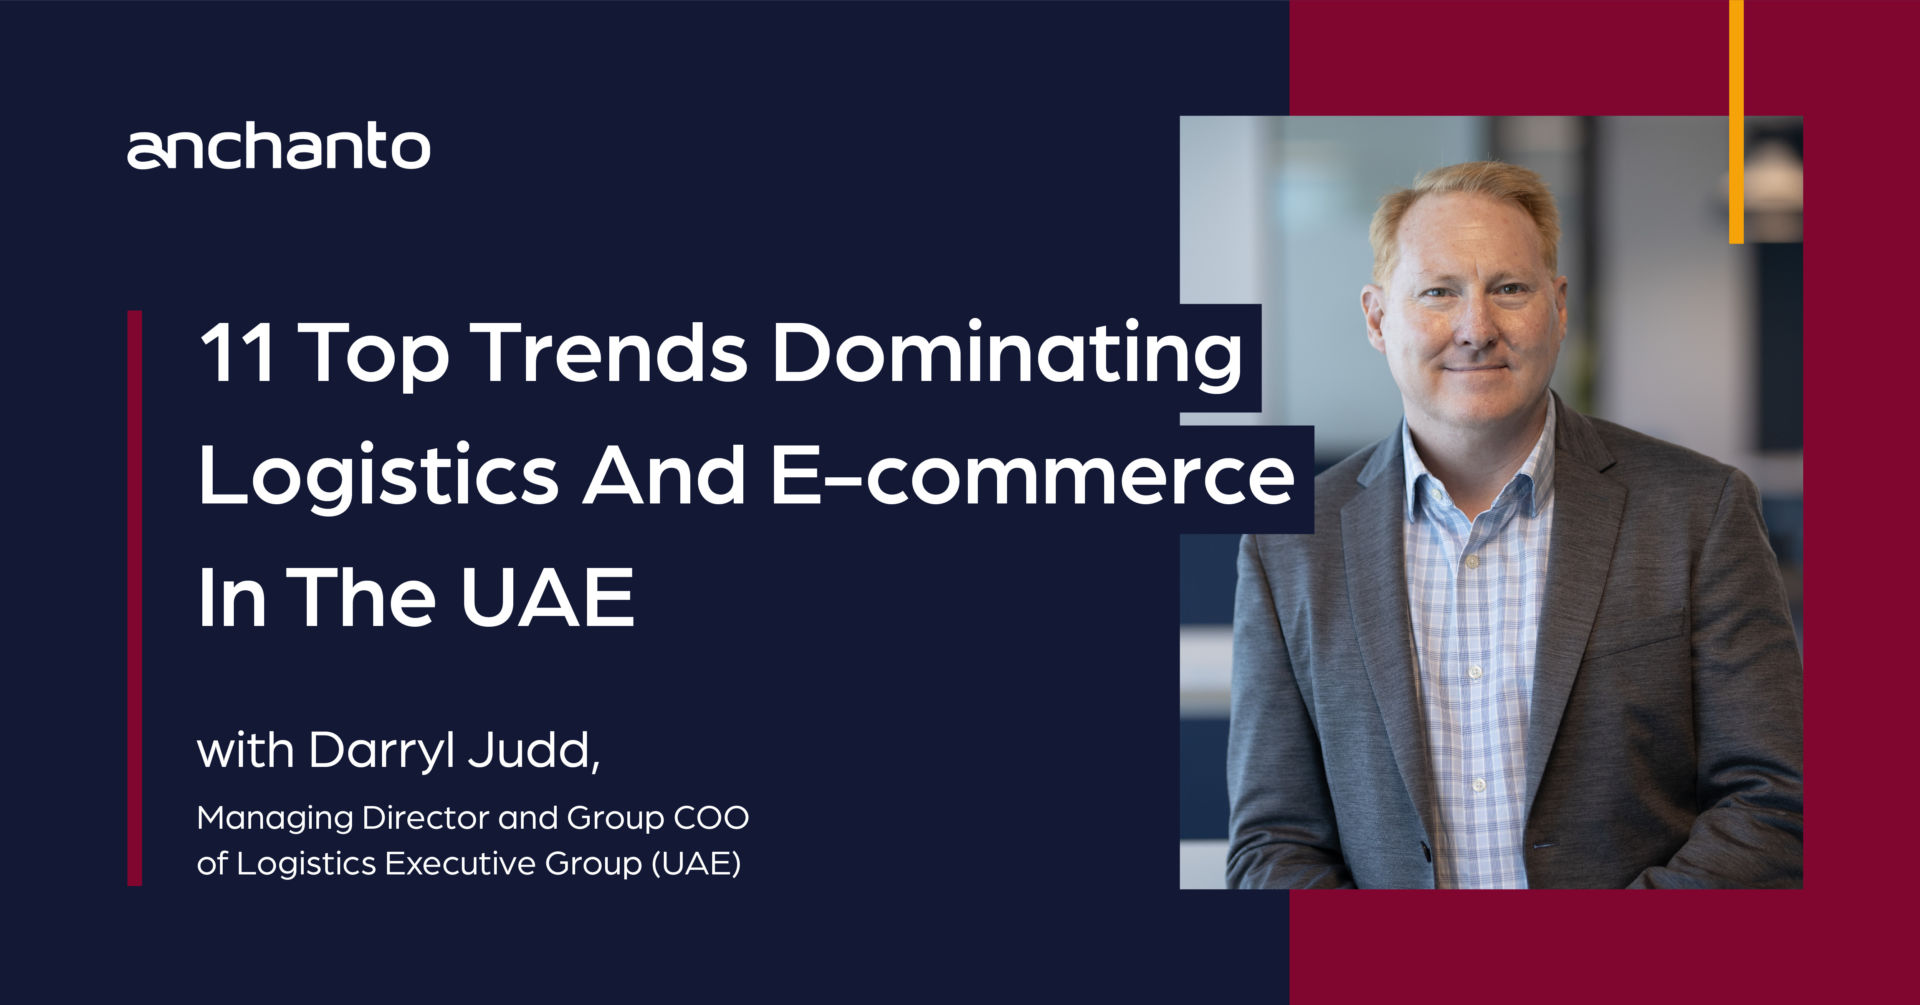 11 Top Trends Dominating Logistics And E-commerce In The UAE